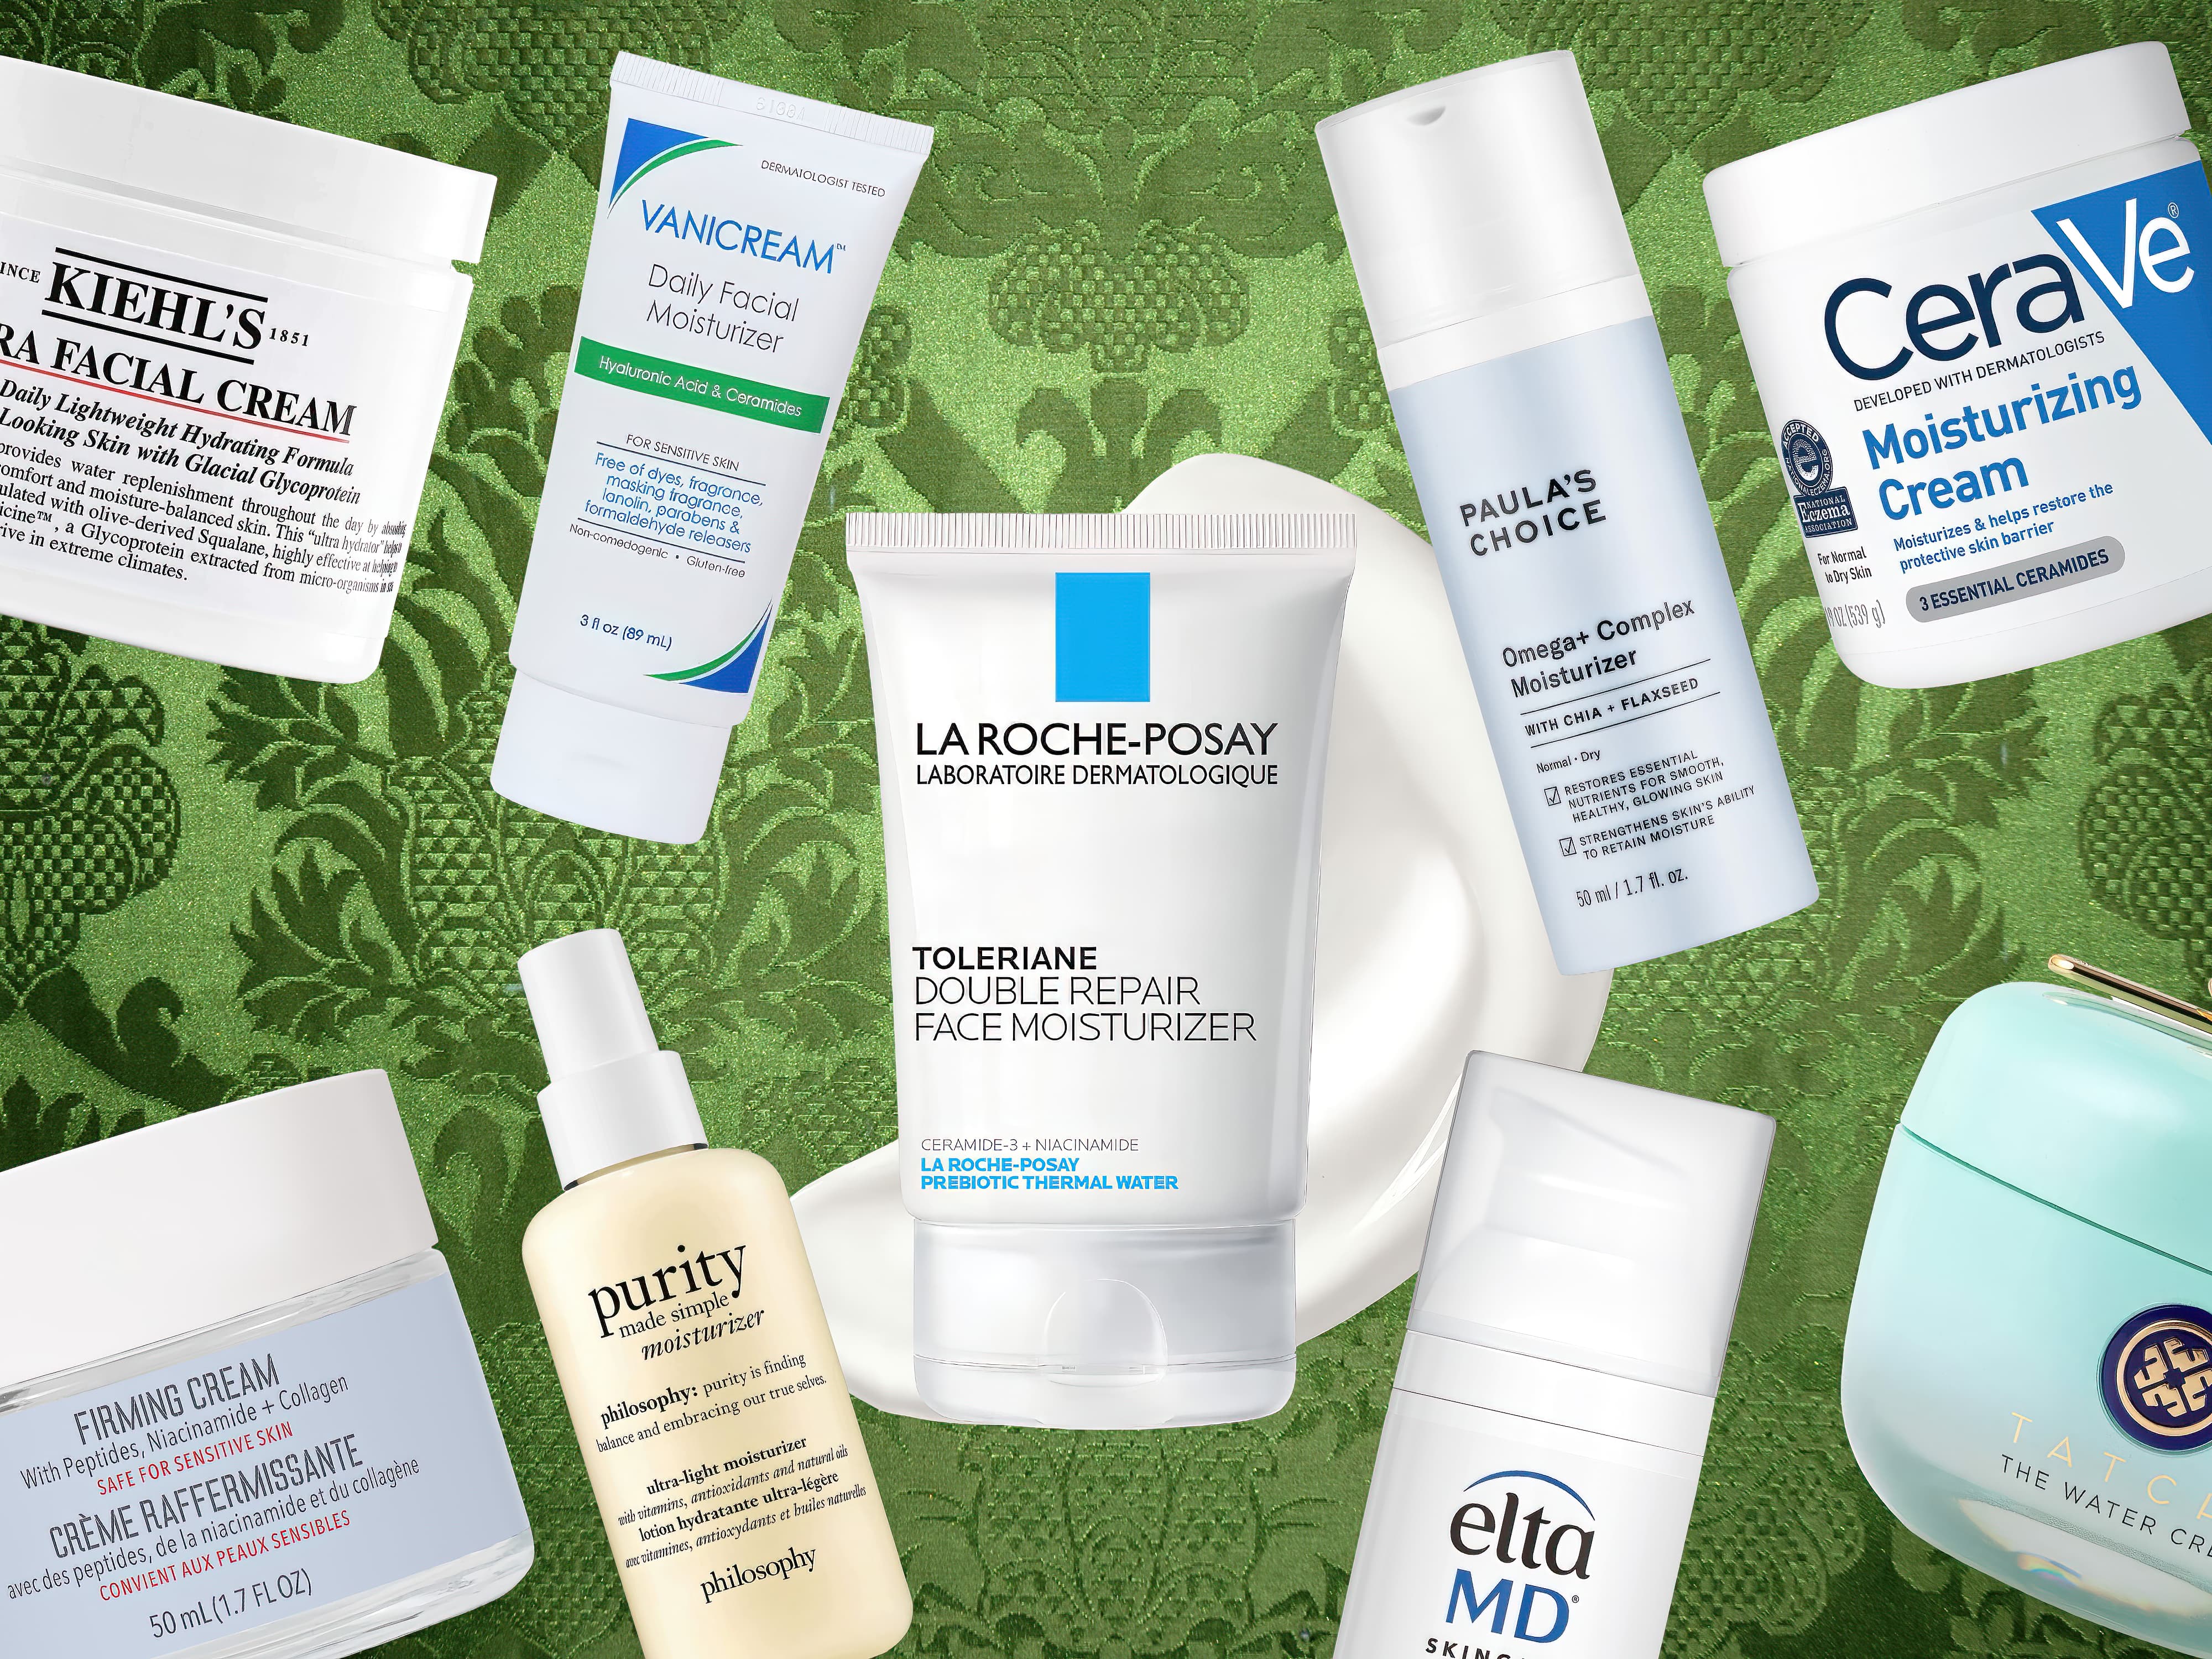 An assortment of the best moisturizers from various brands arranged on a decorative green background